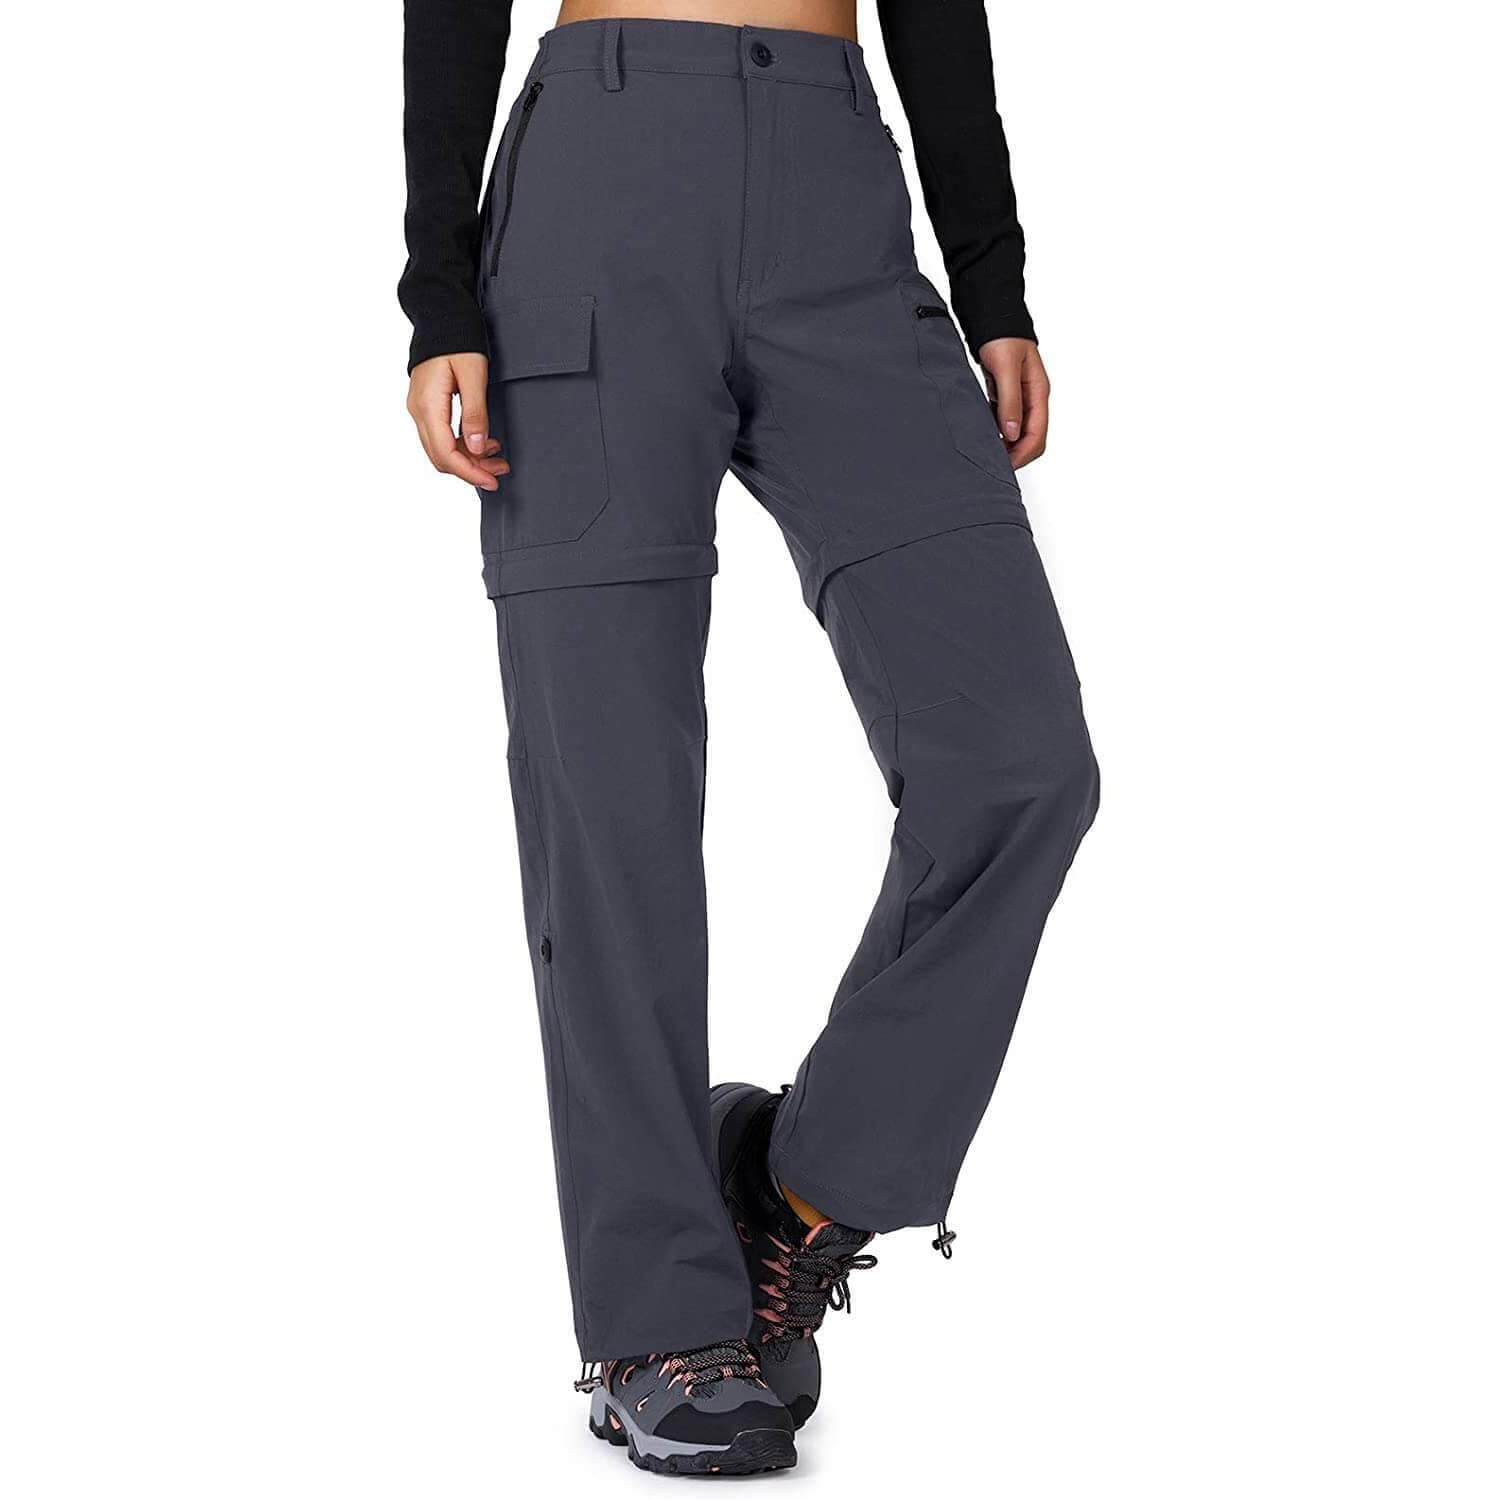  Womens Hiking Pants Convertible Quick Dry Scout